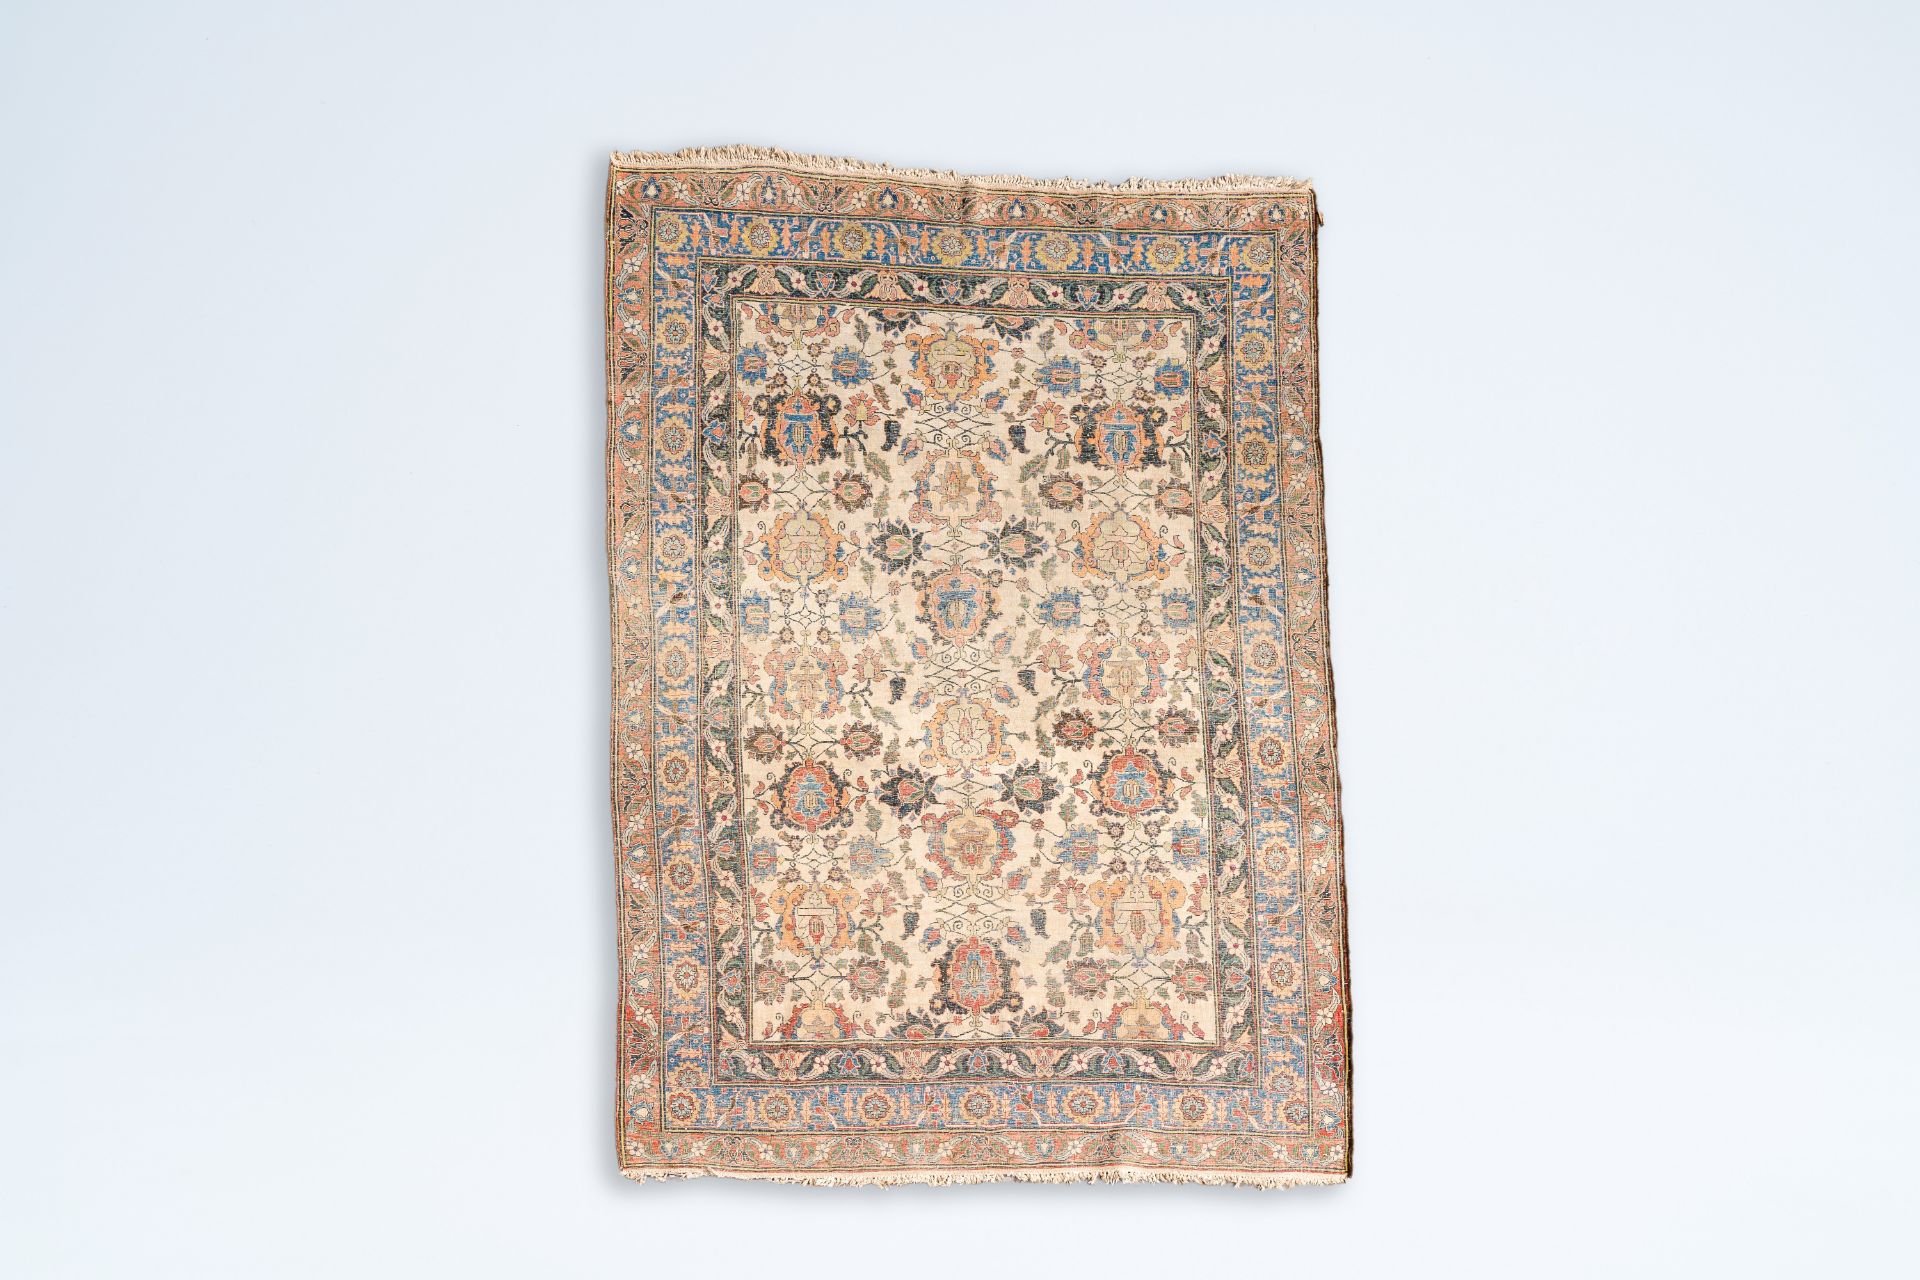 A Persian Kashan rug with floral design, wool on cotton, 20th C. - Image 2 of 4